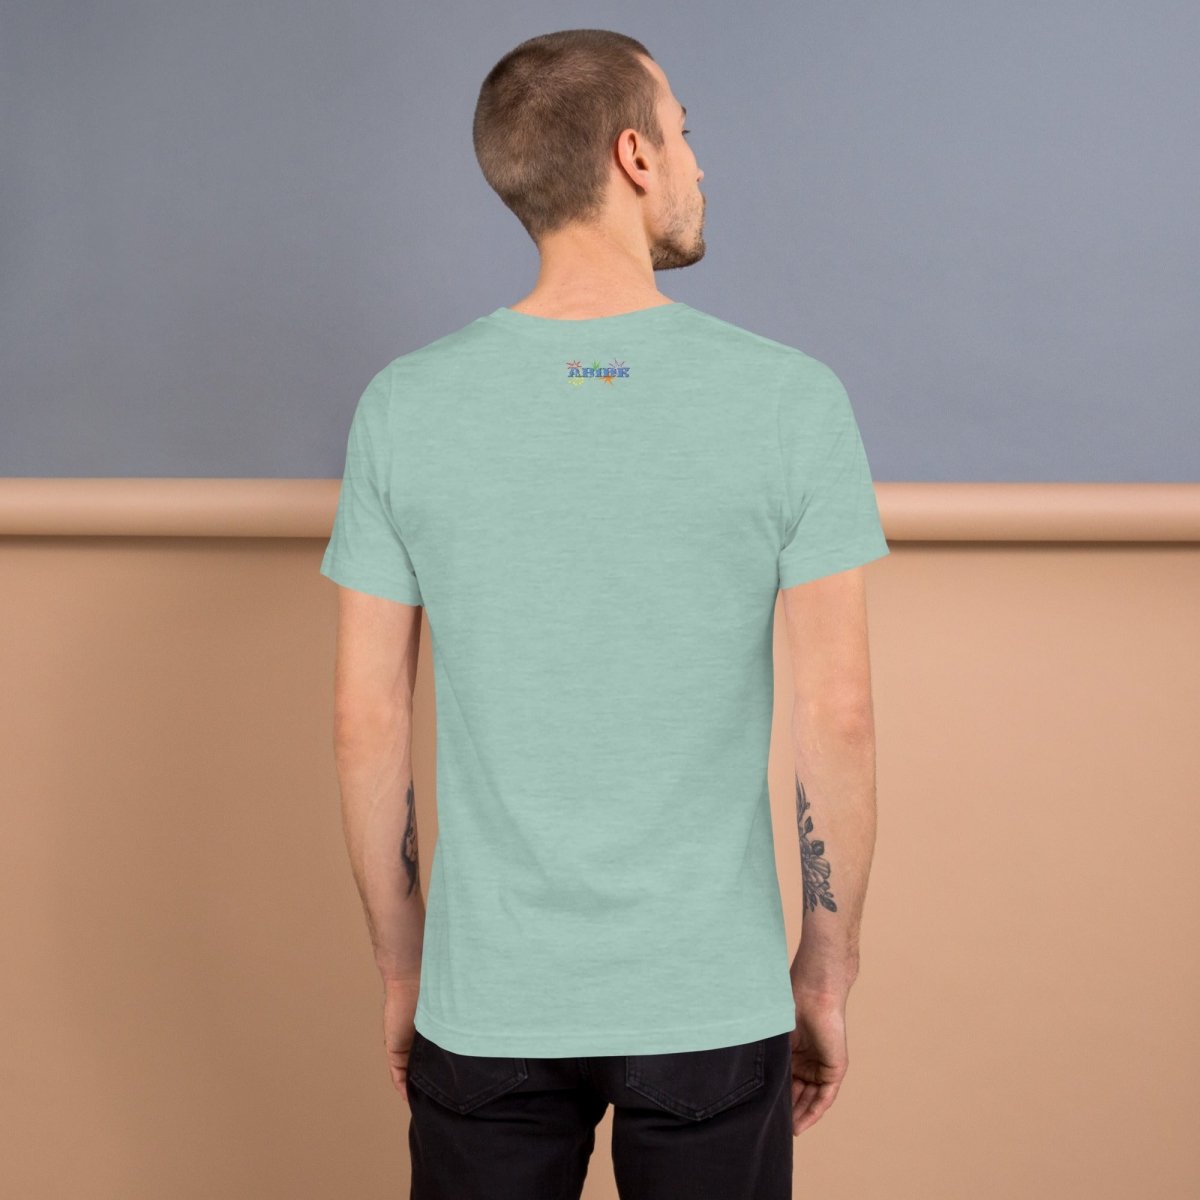 Dad Noises- Dadisms - Don't Make Me Pull This Car Over Light Blue Unisex t-shirt back view - The Dude Abides - Birthday